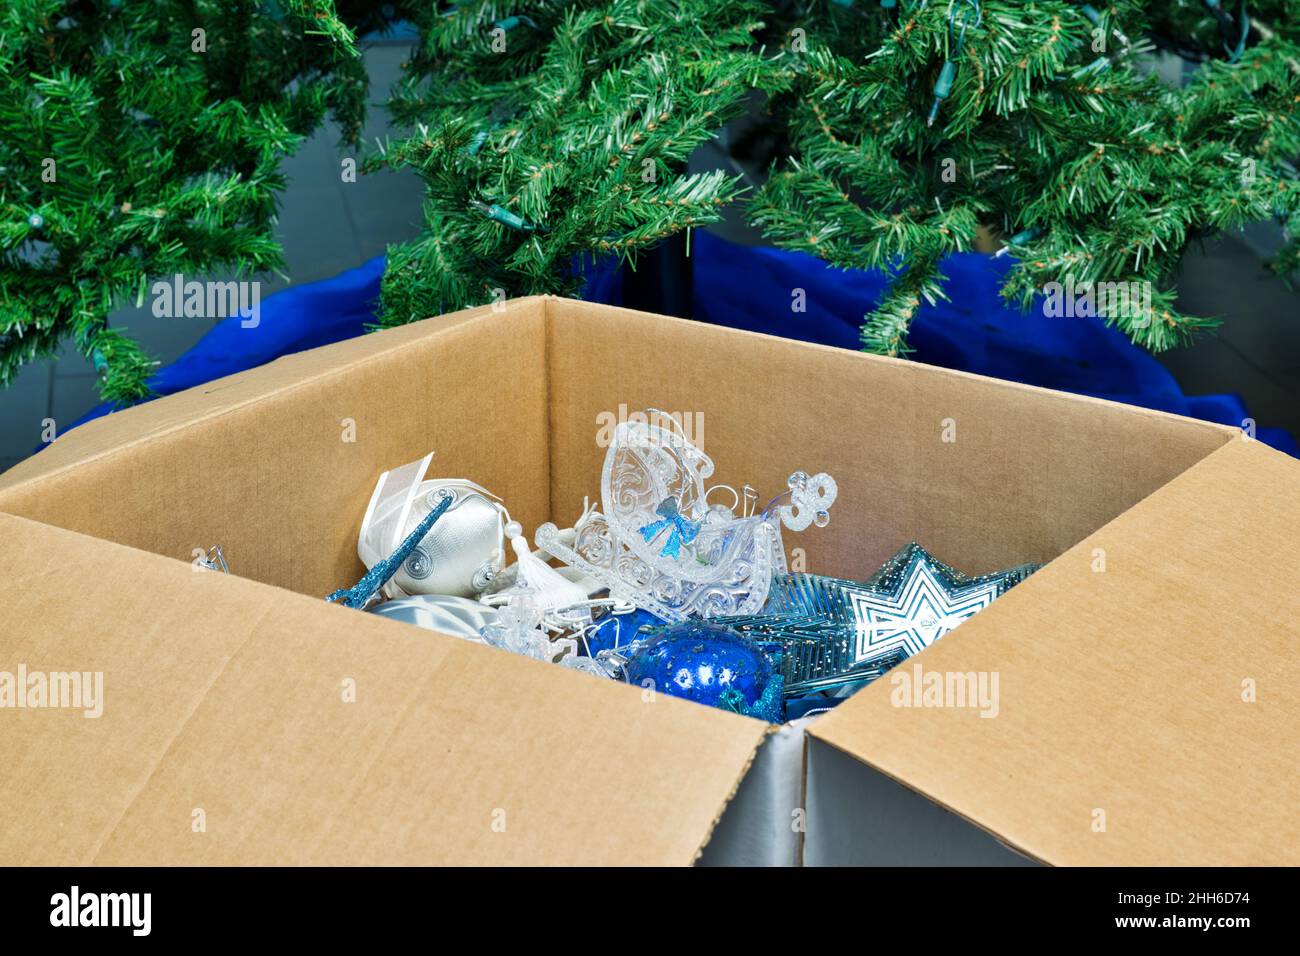 Packing away Christmas decorations after the new year. Box of ornaments in front of empty tree and skirt. Stock Photo